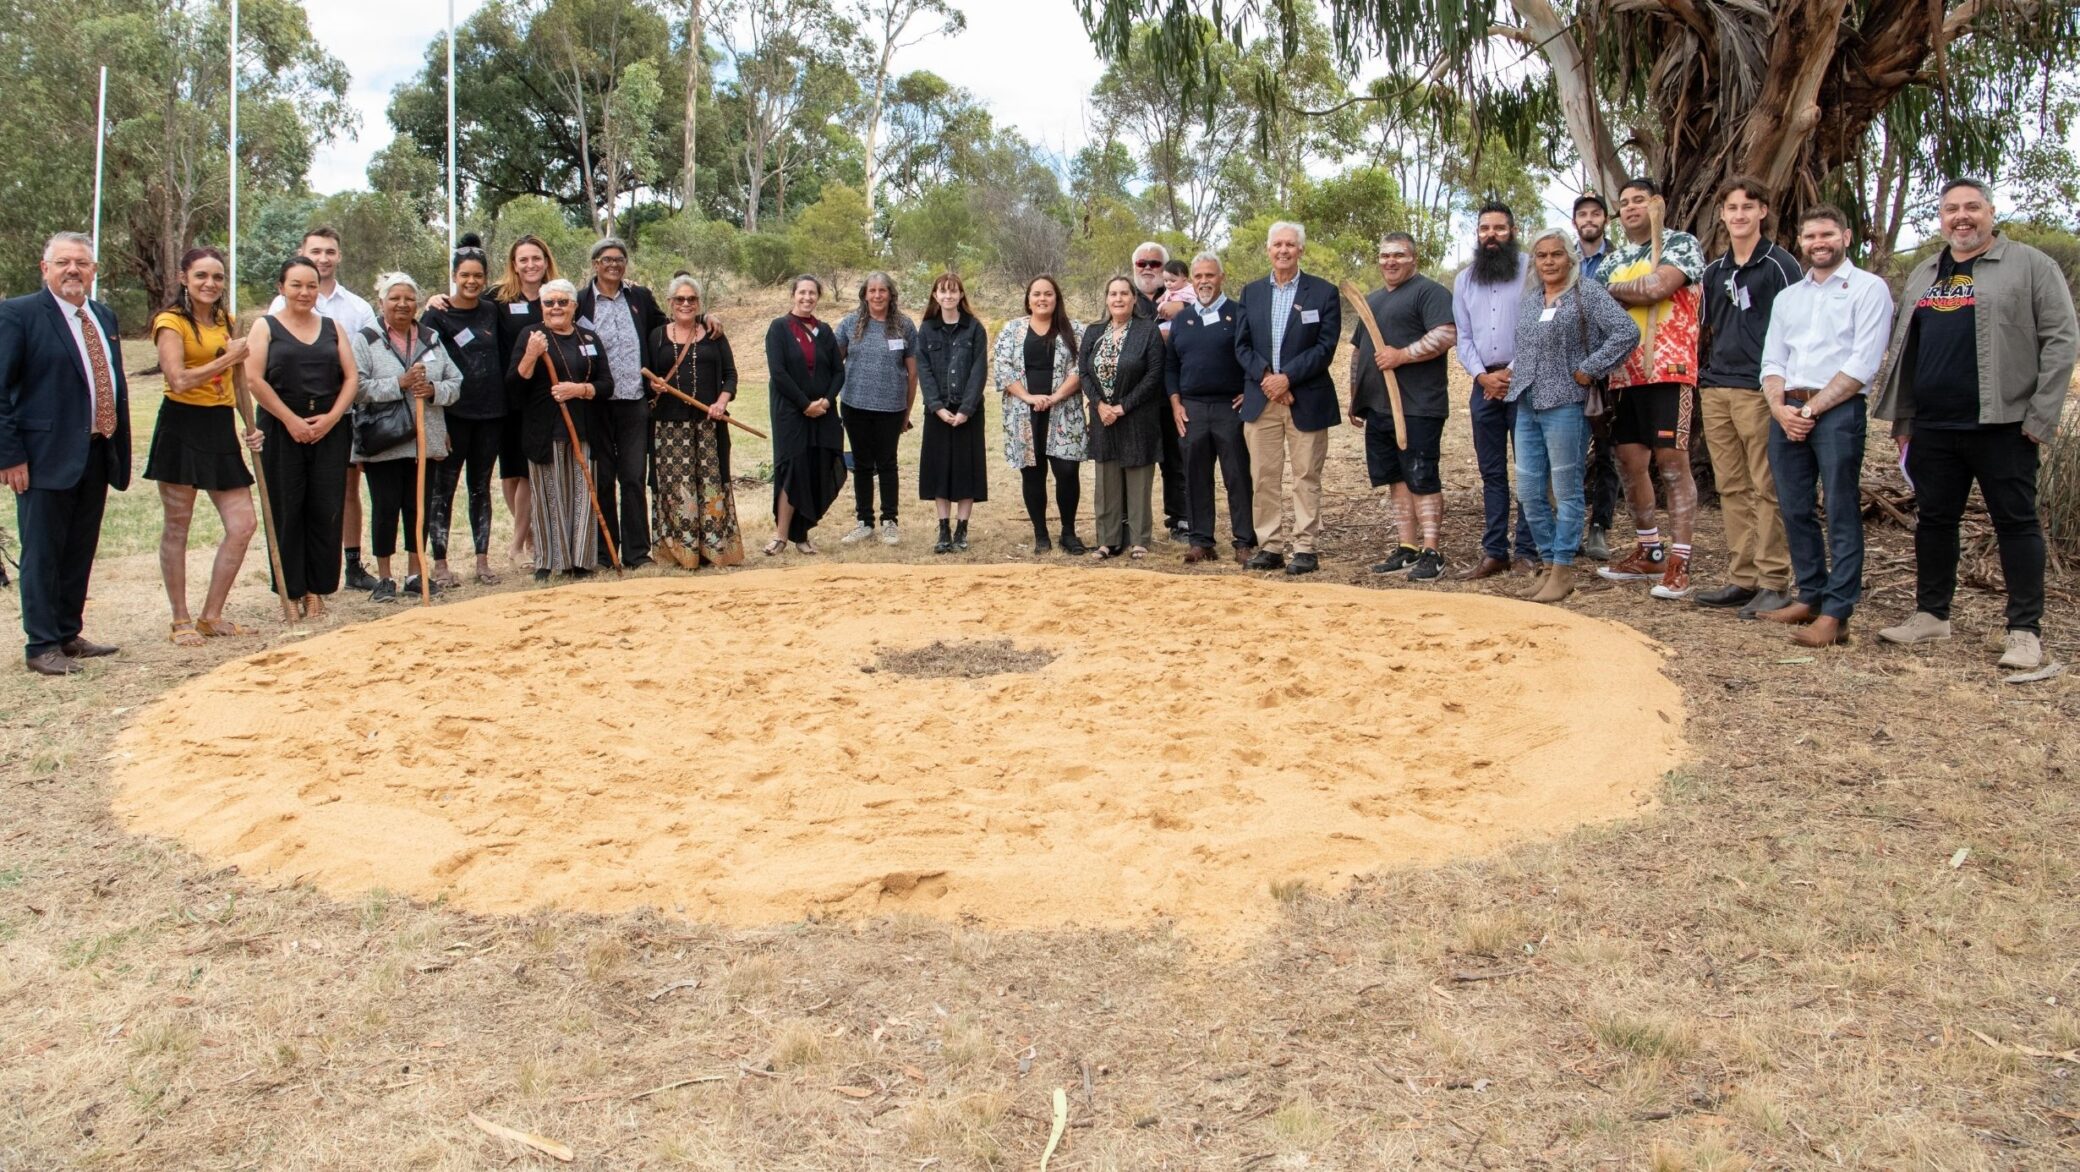 LAND HANDED BACK TO DJA DJA WURRUNG TRADITIONAL OWNERS